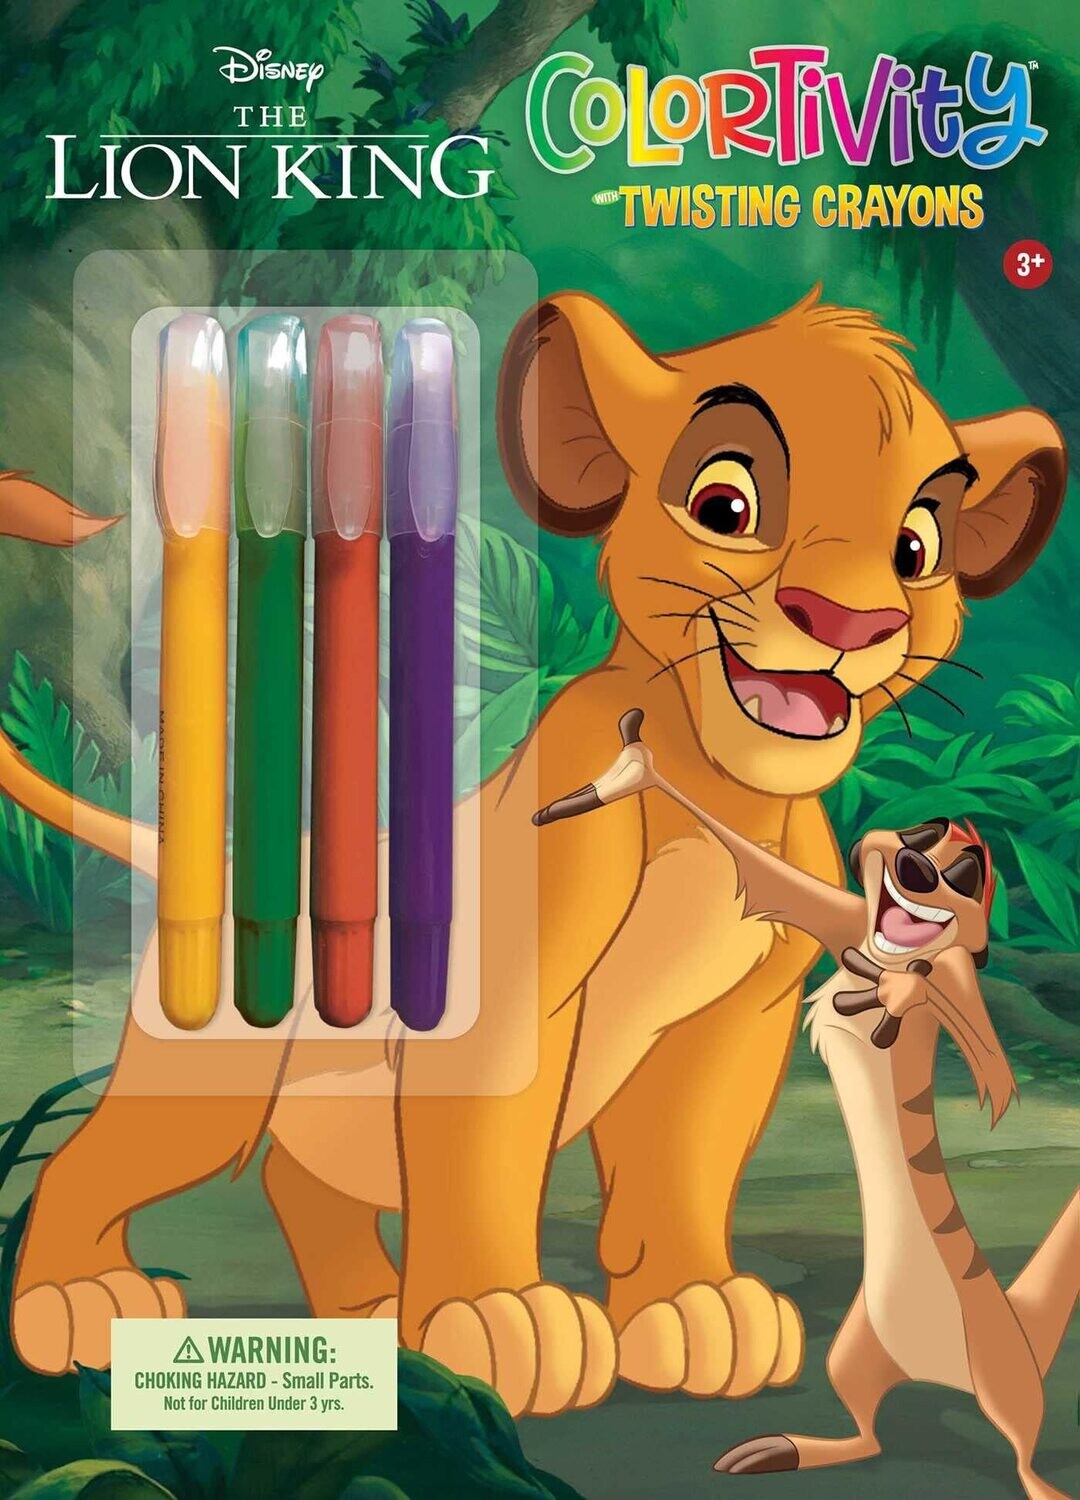 Disney The Lion King: Colortivity Twisting Crayons (Paperback, NEW)